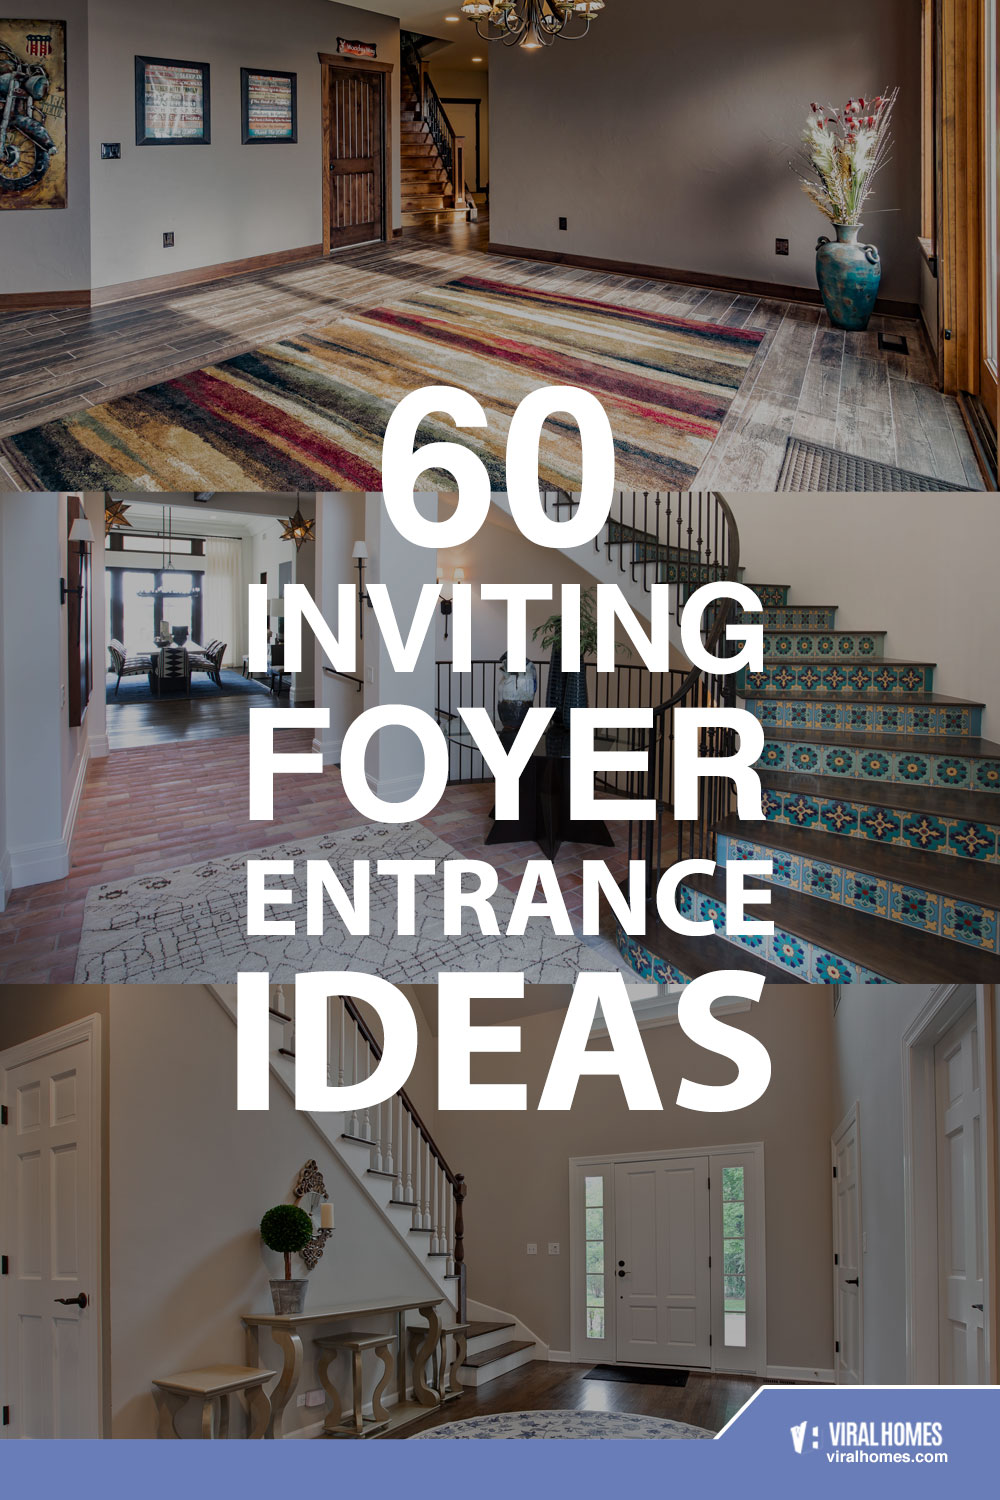 Inviting Foyer Entrance Ideas That Will Make Guests Feel Welcome